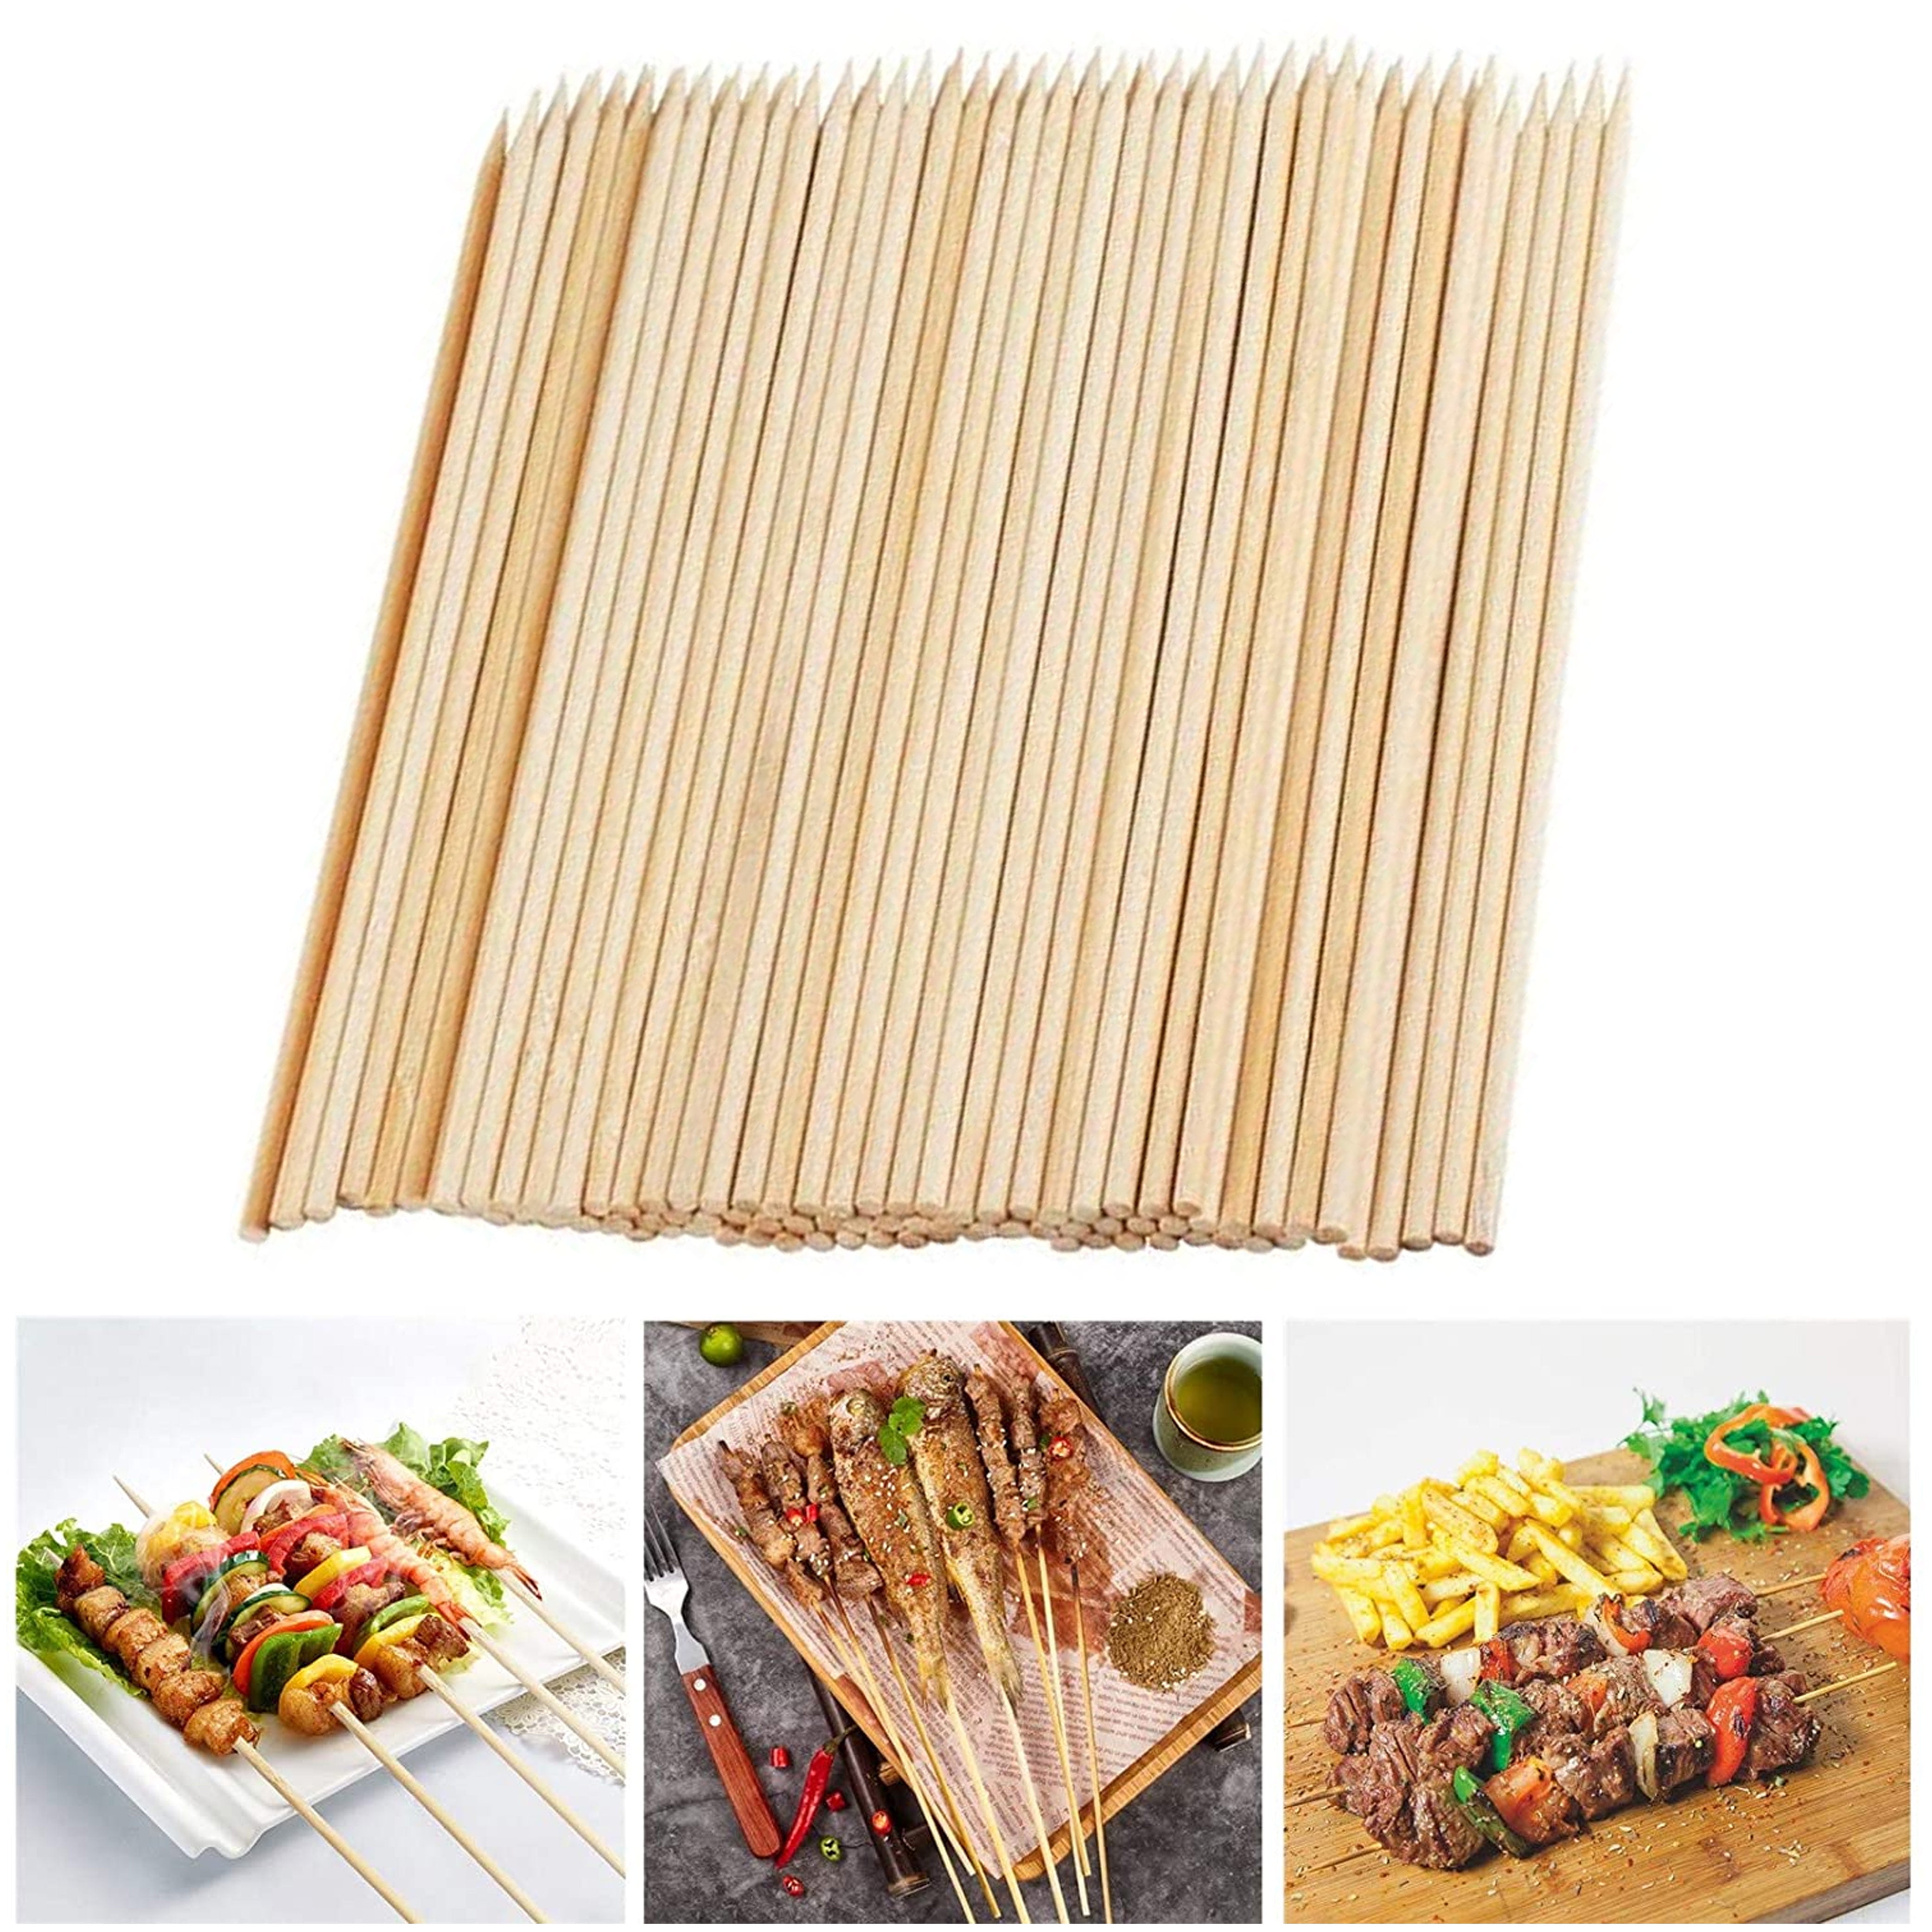 Prestee 100 Pack Bamboo Skewers for Grilling, BBQ, Kabobs, Crafts & Outdoor  Parties 10-inch Brown Wooden Skewers for Crafts, Bamboo Sticks, Skewer